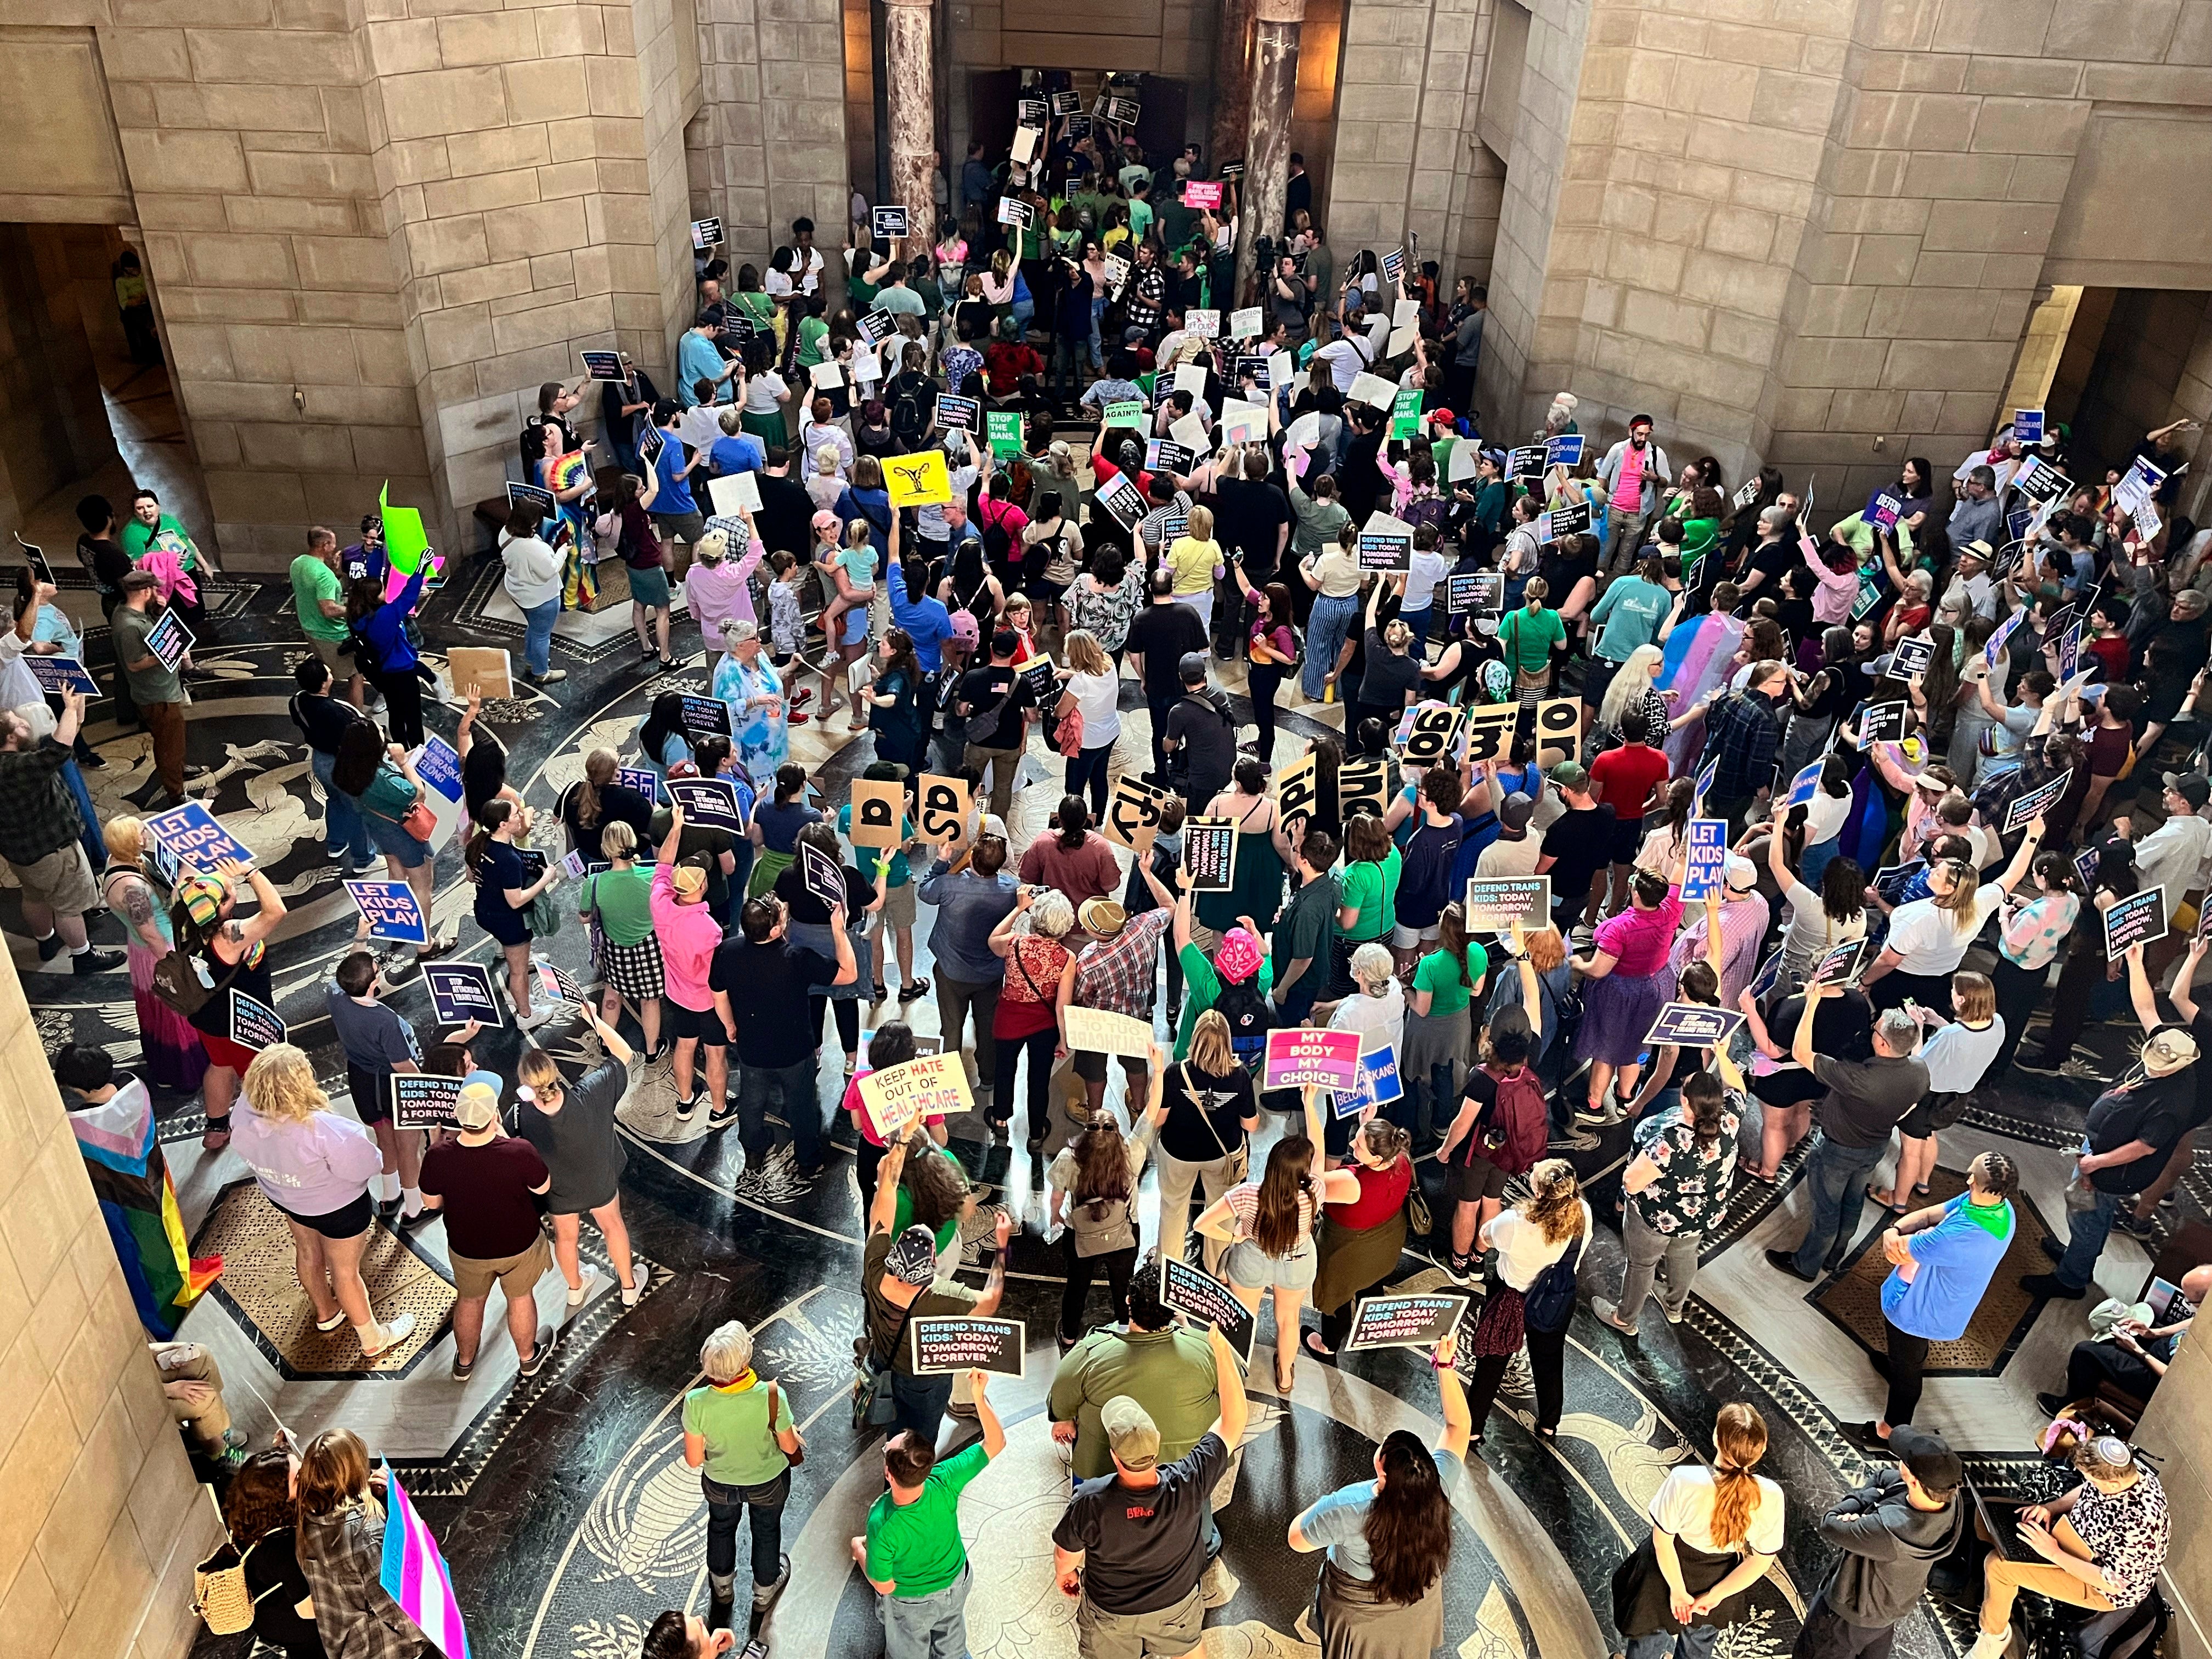 Hundreds of people filled the Nebraska Capitol in Lincoln on 16 May chanting ‘one vote to save our lives’ in protest of a measure targeting abortion rights and gender-affirming care for trans youth.